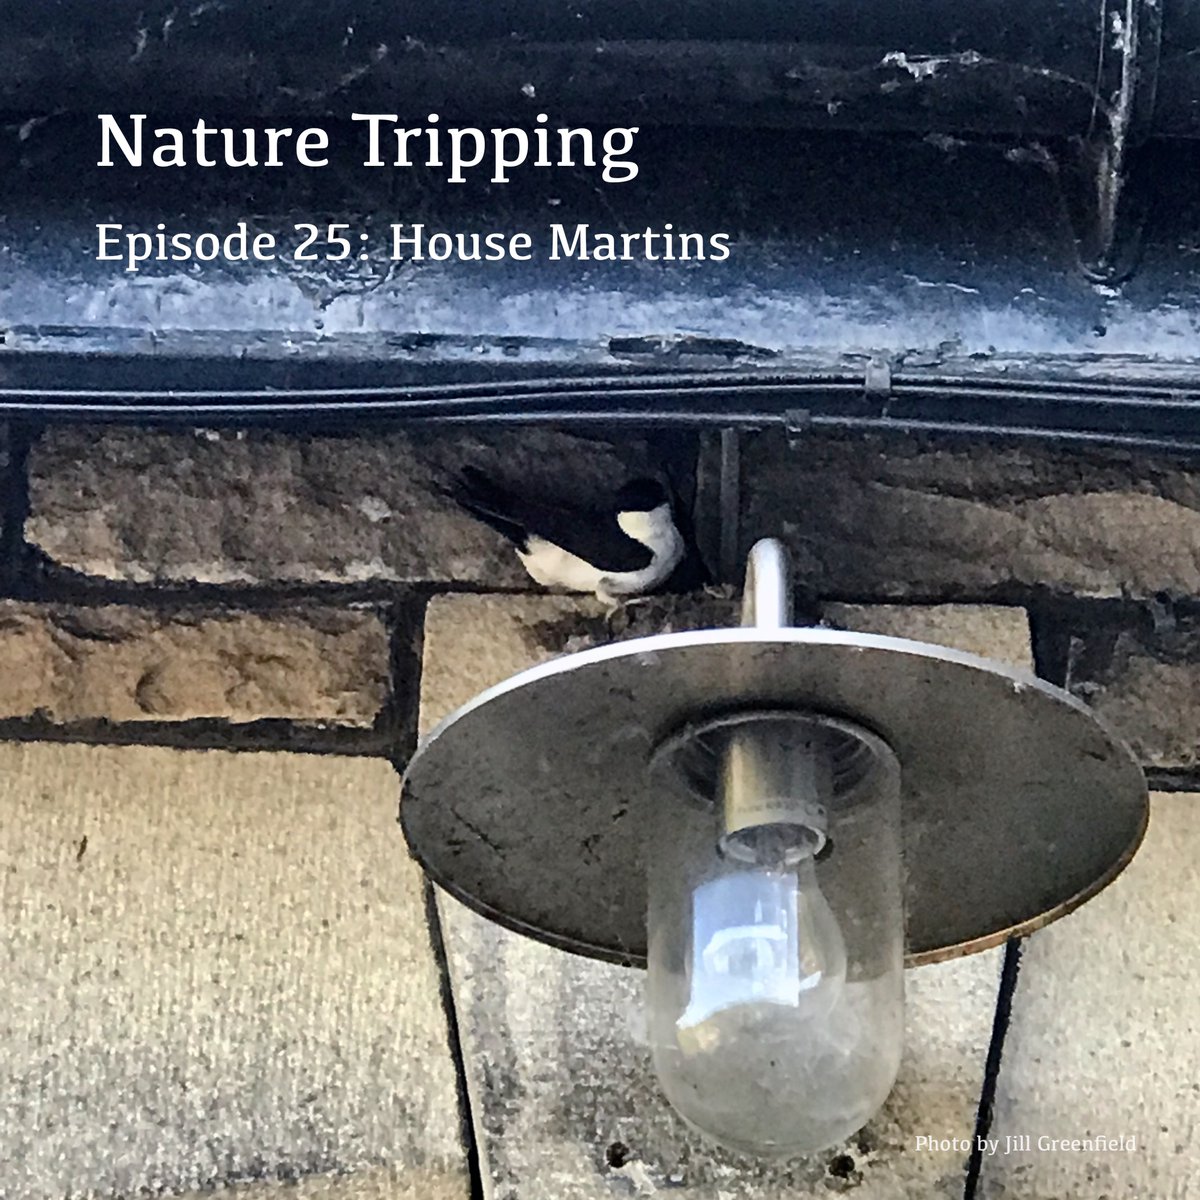 Jill and Kathryn make a discovery under their eaves: House martins have arrived! A summer of ups & downs follows & we track events over the year to learn more about these ‘epic’ little migrant birds, & how to love a ‘pile of poop’ 🙂. Available now from your podcast provider.